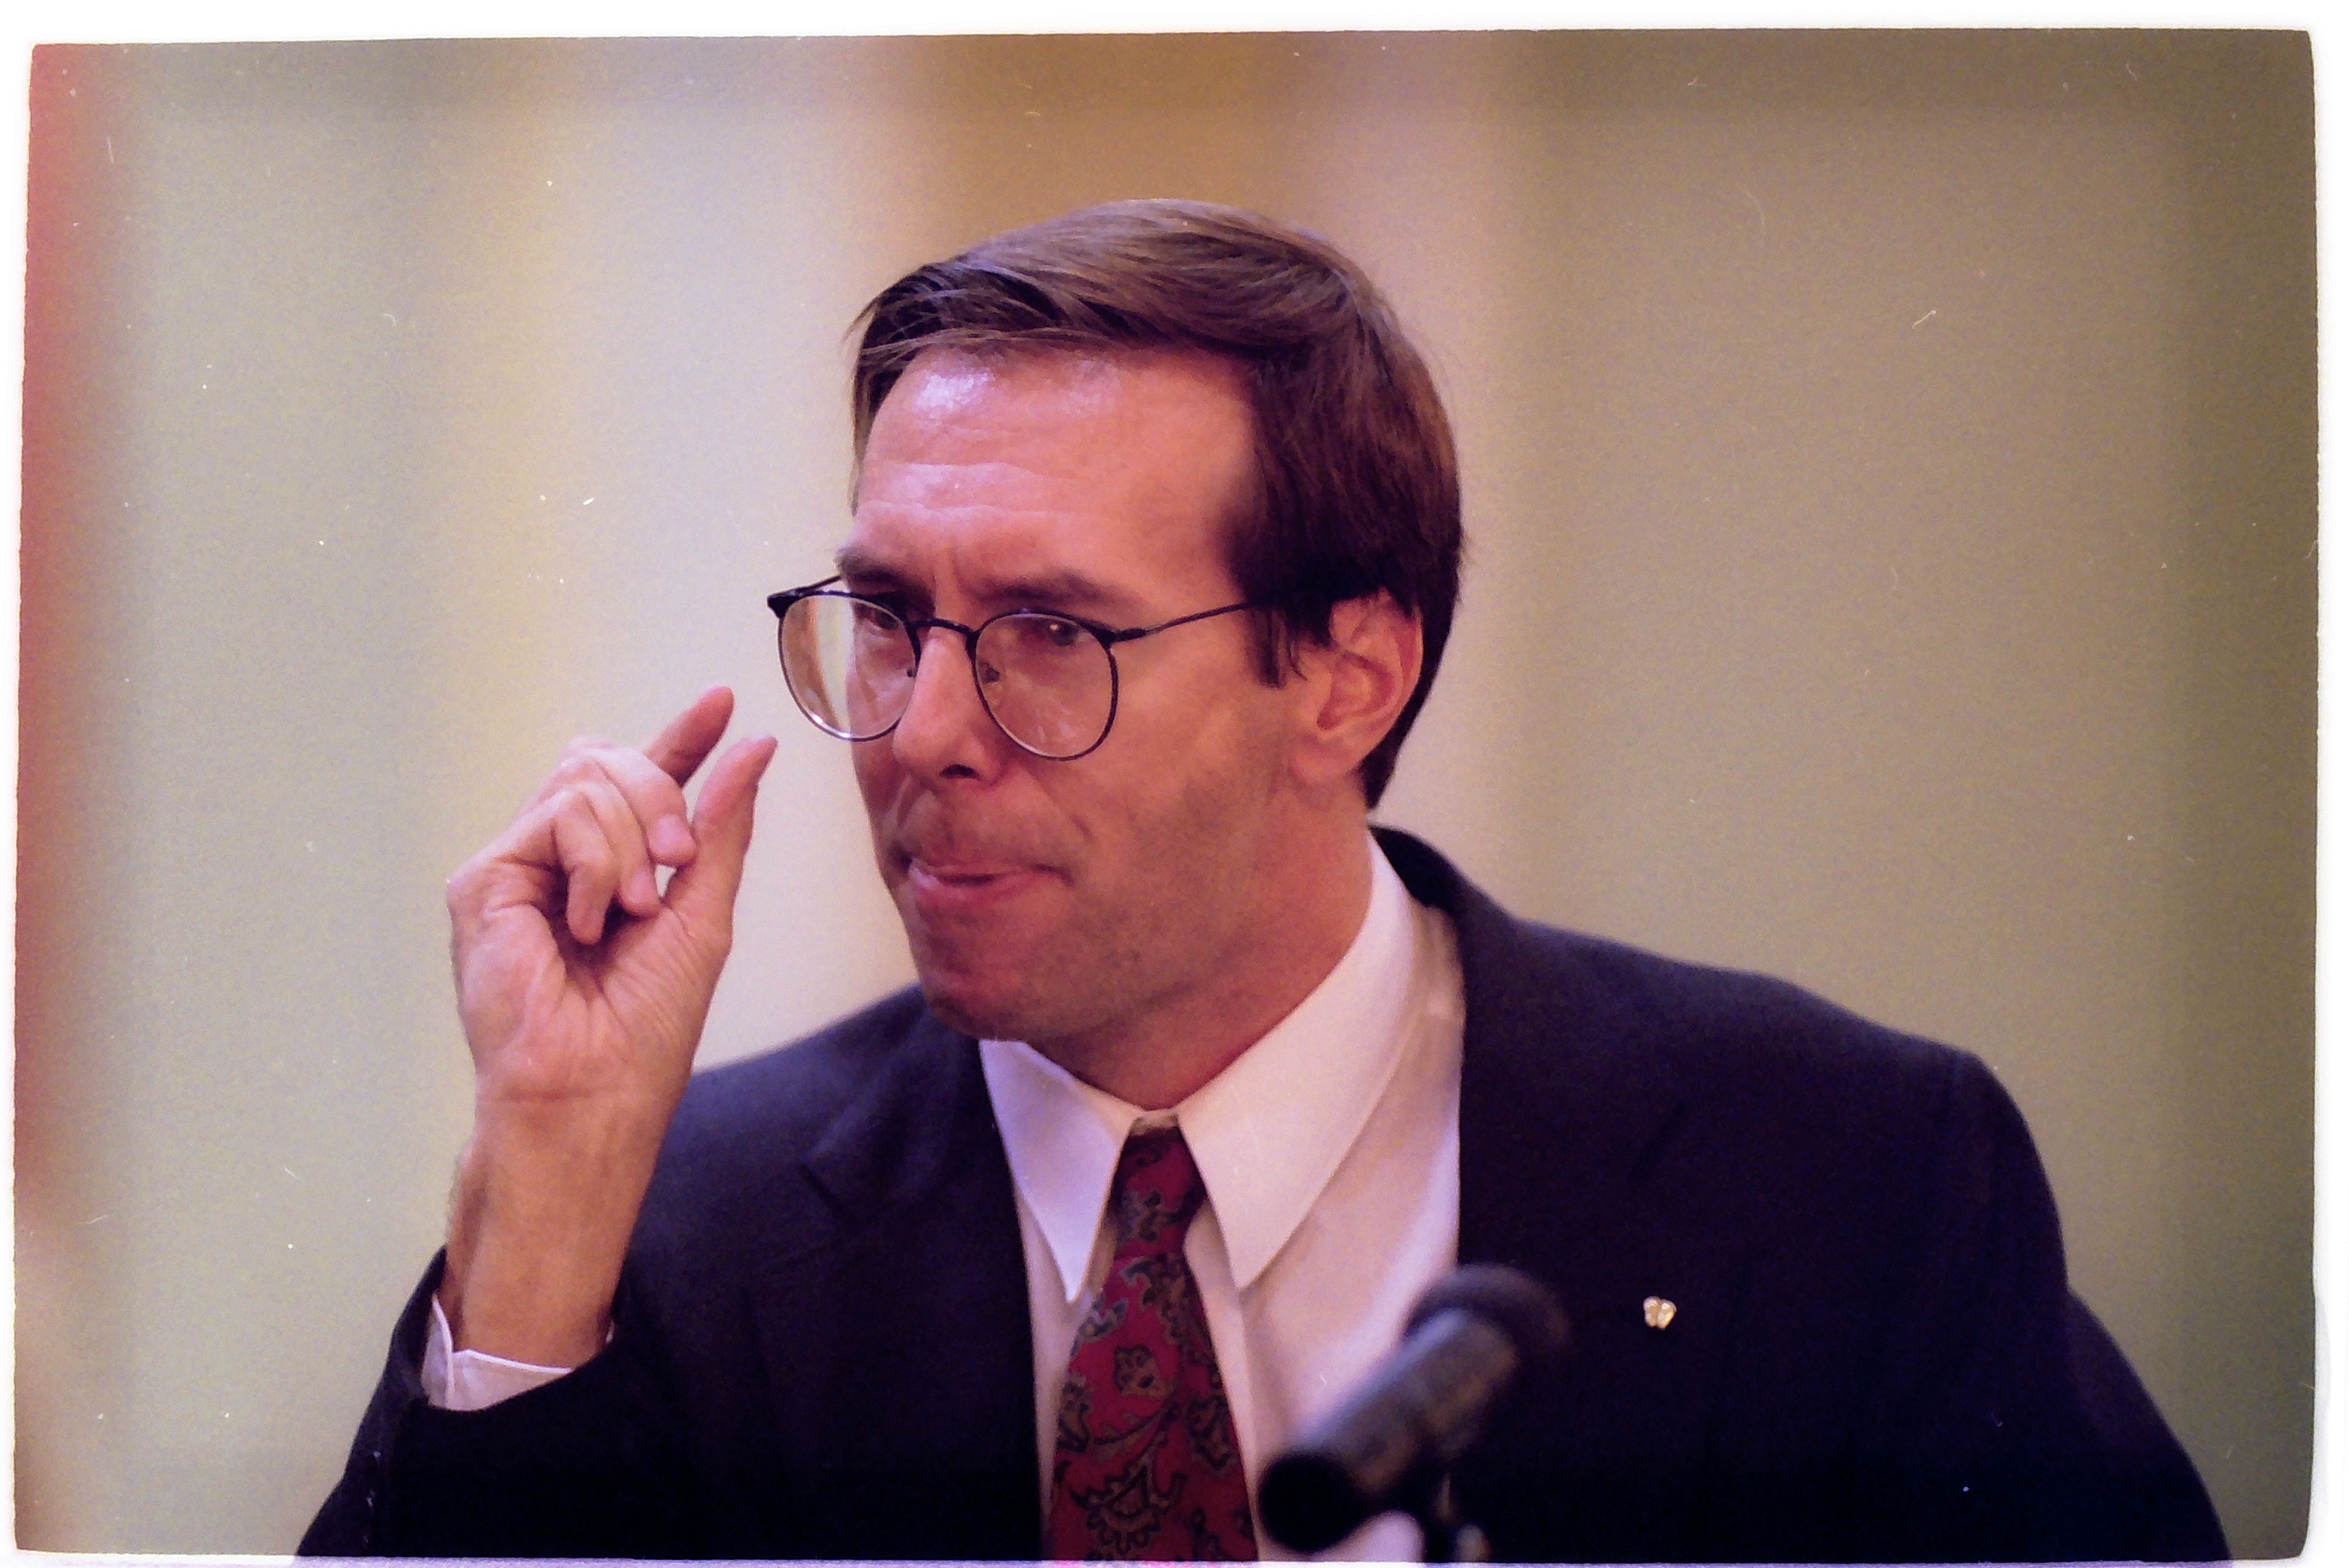 District Attorney John Zakowski argues for the state Oct. 27, 1995.